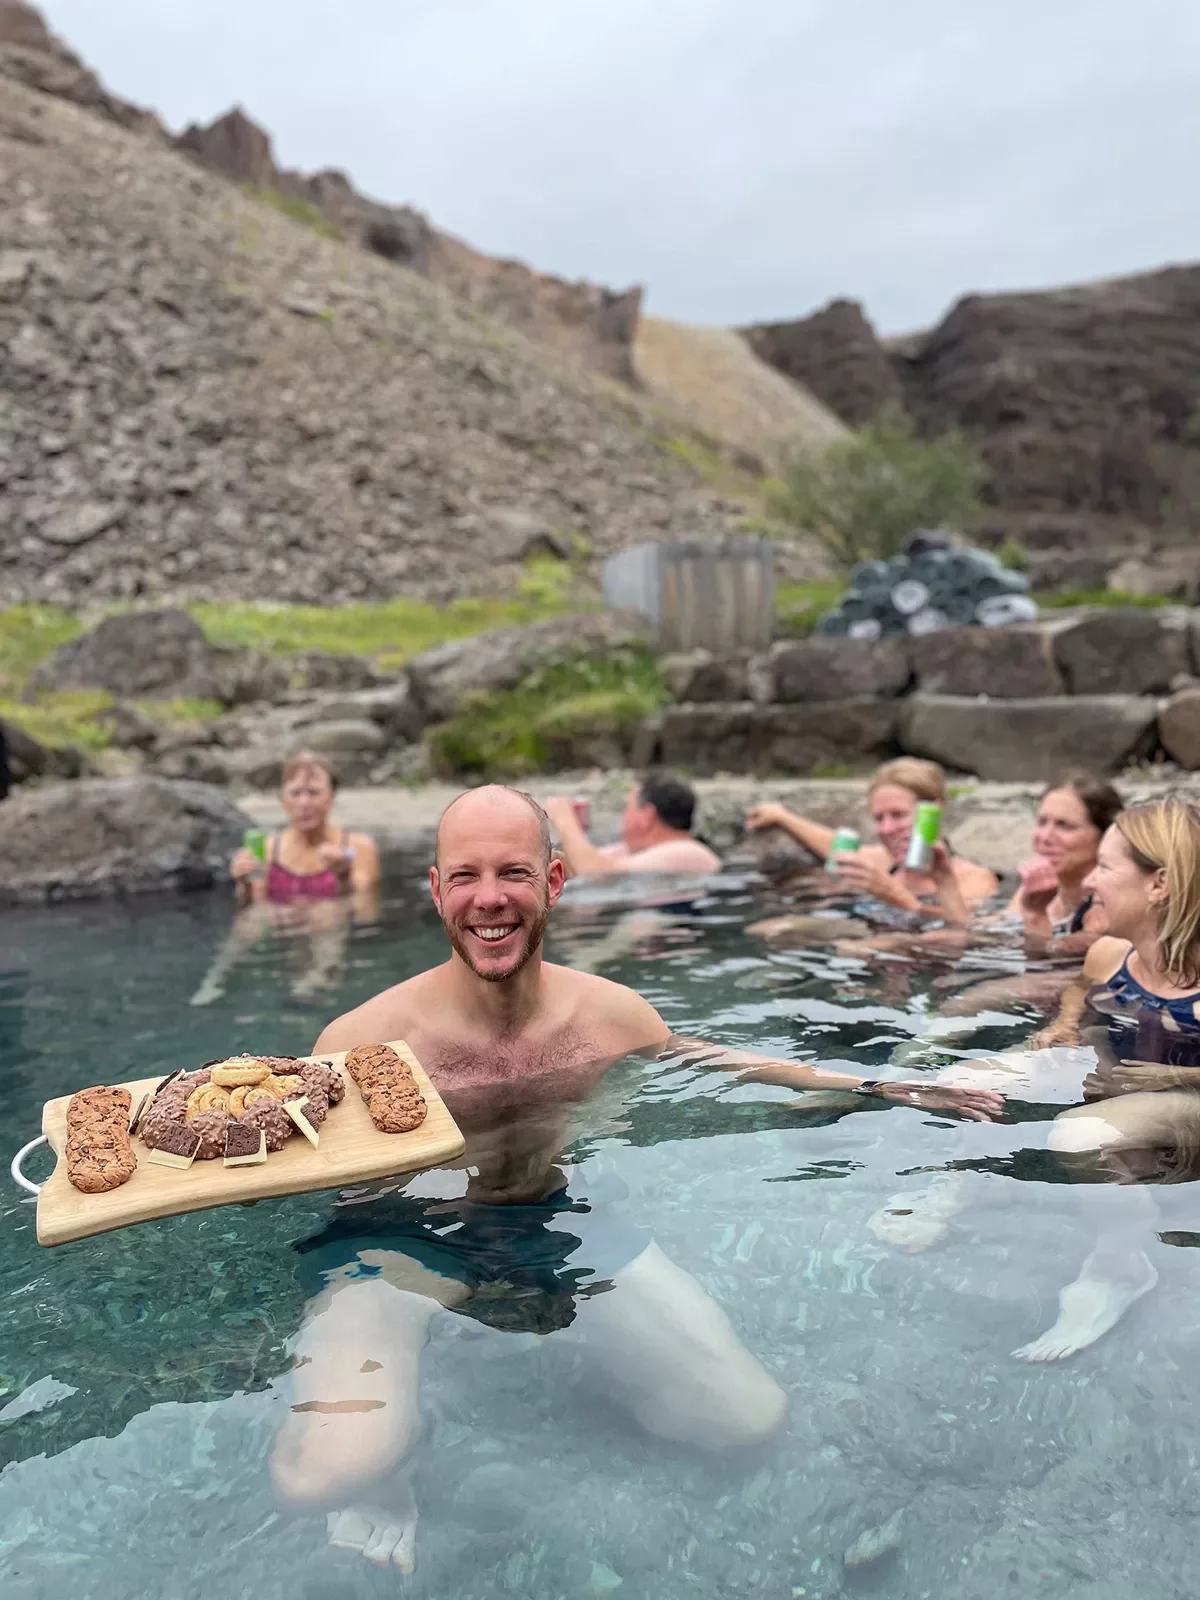 Man in a pool holding a cutting board full of cookies